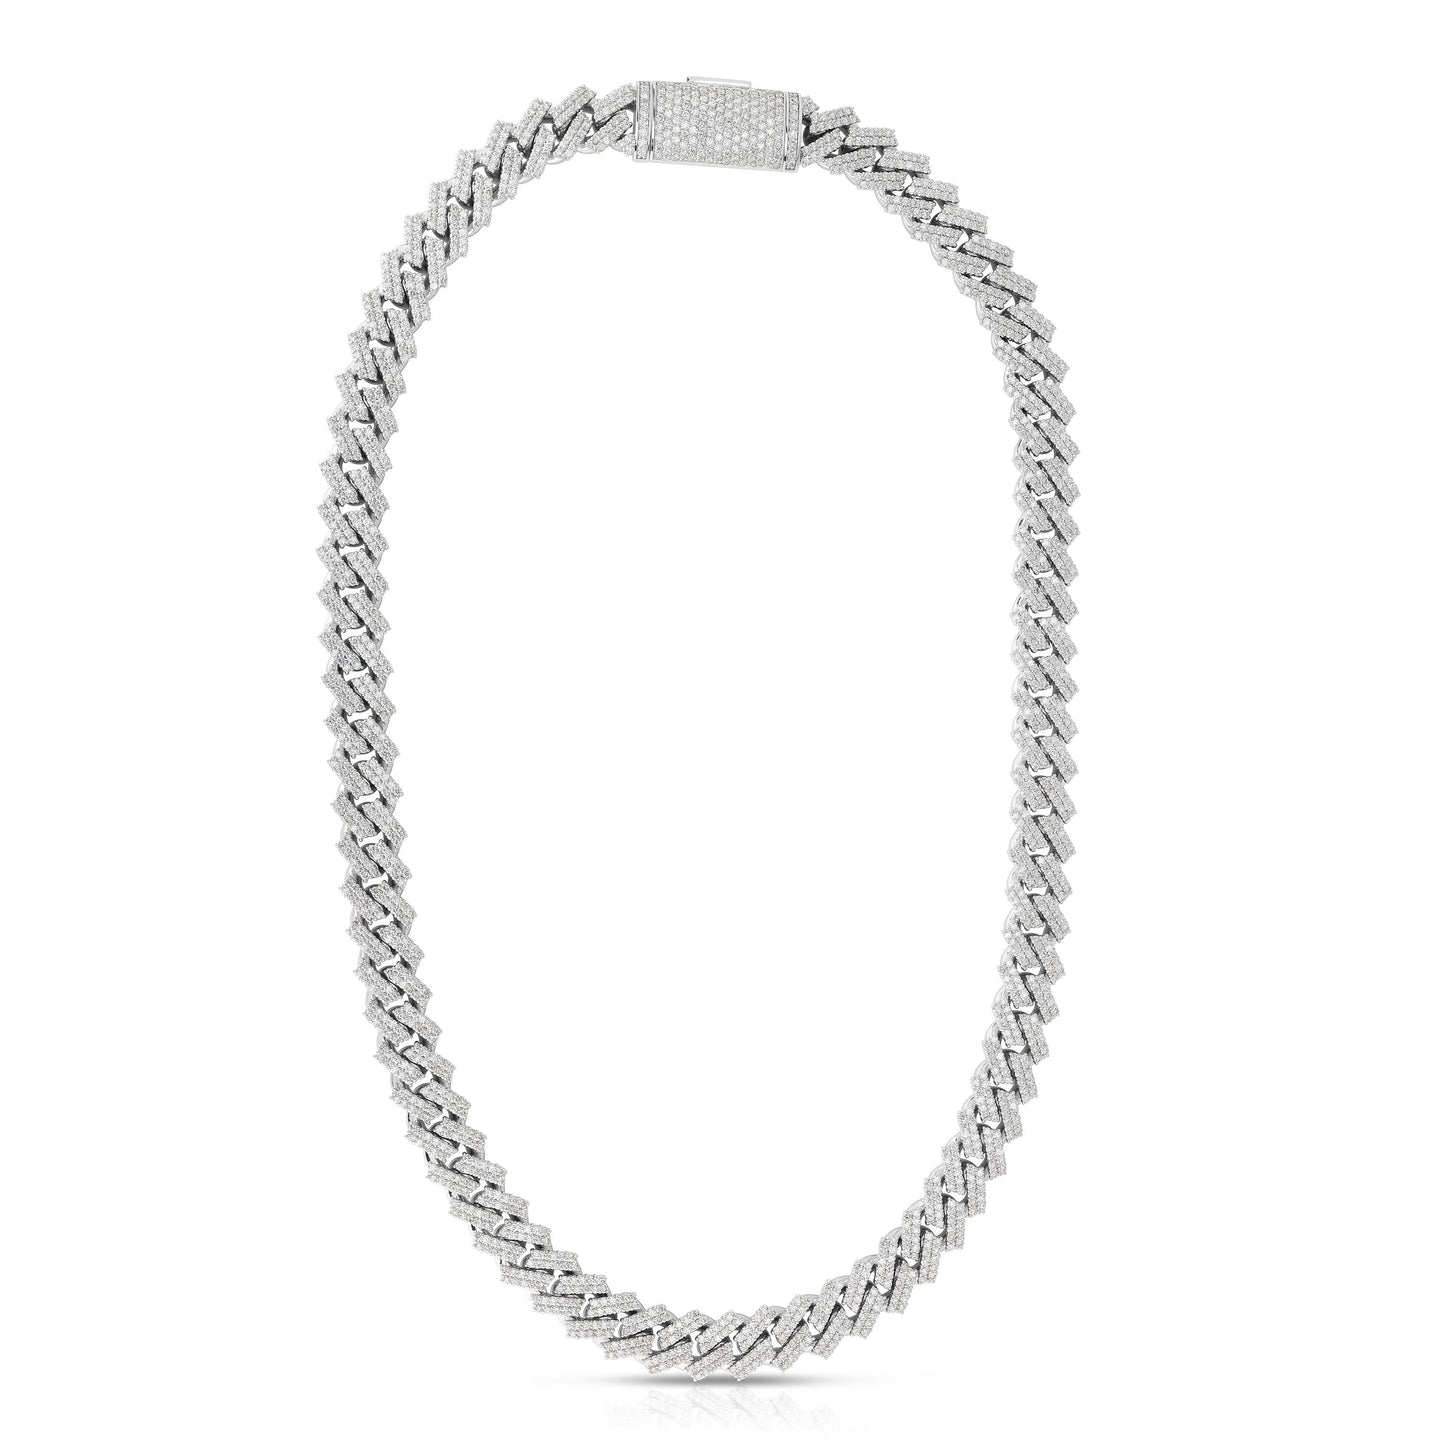 Sabel Collection 14K White Gold Round Diamond Pave Curb Link Necklace